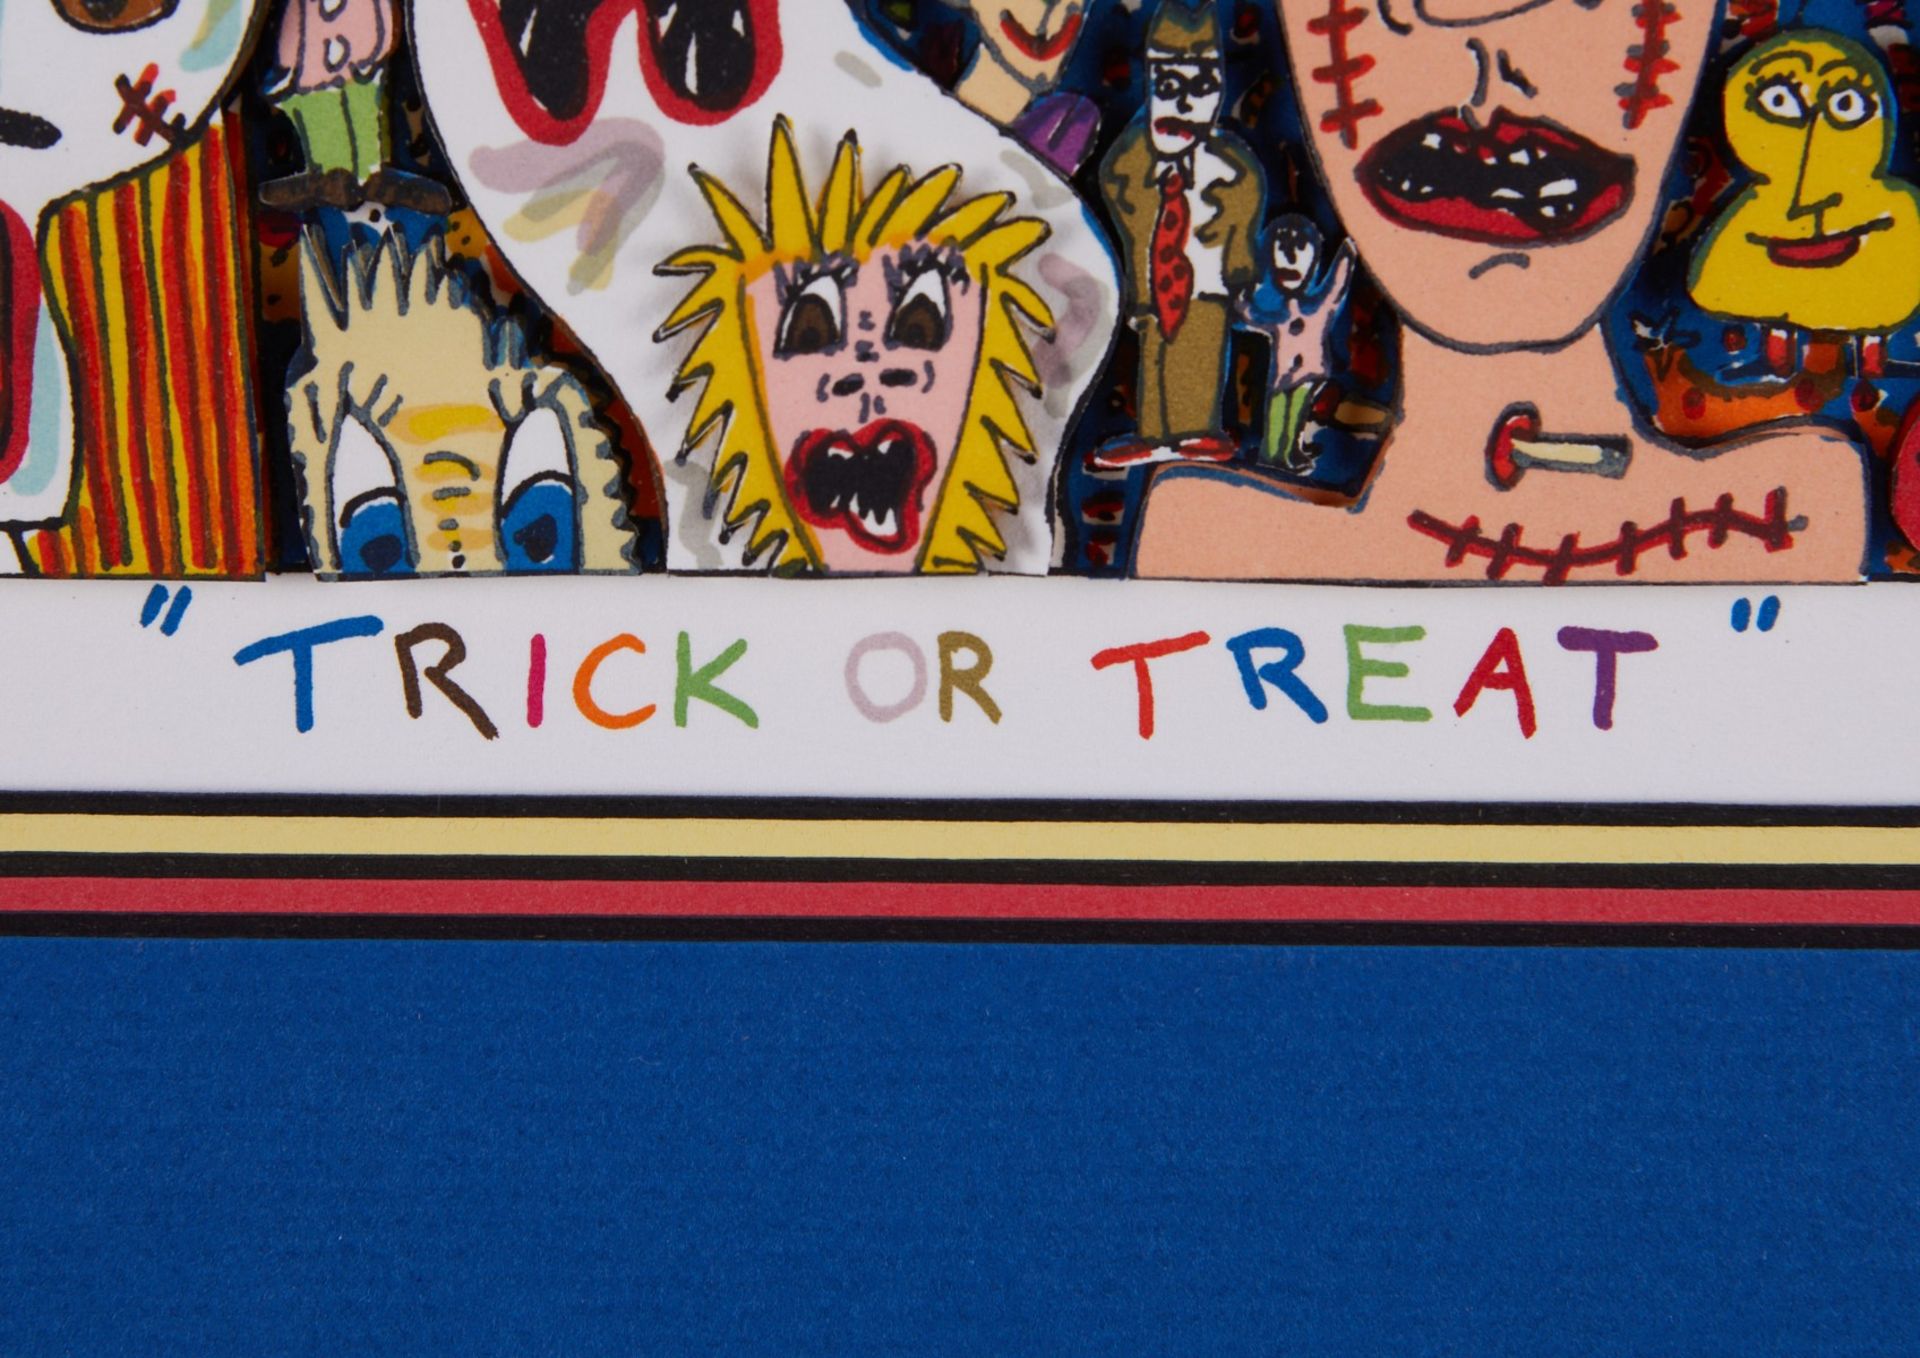 James Rizzi "Trick or Treat" Mixed Media Collage - Image 4 of 6